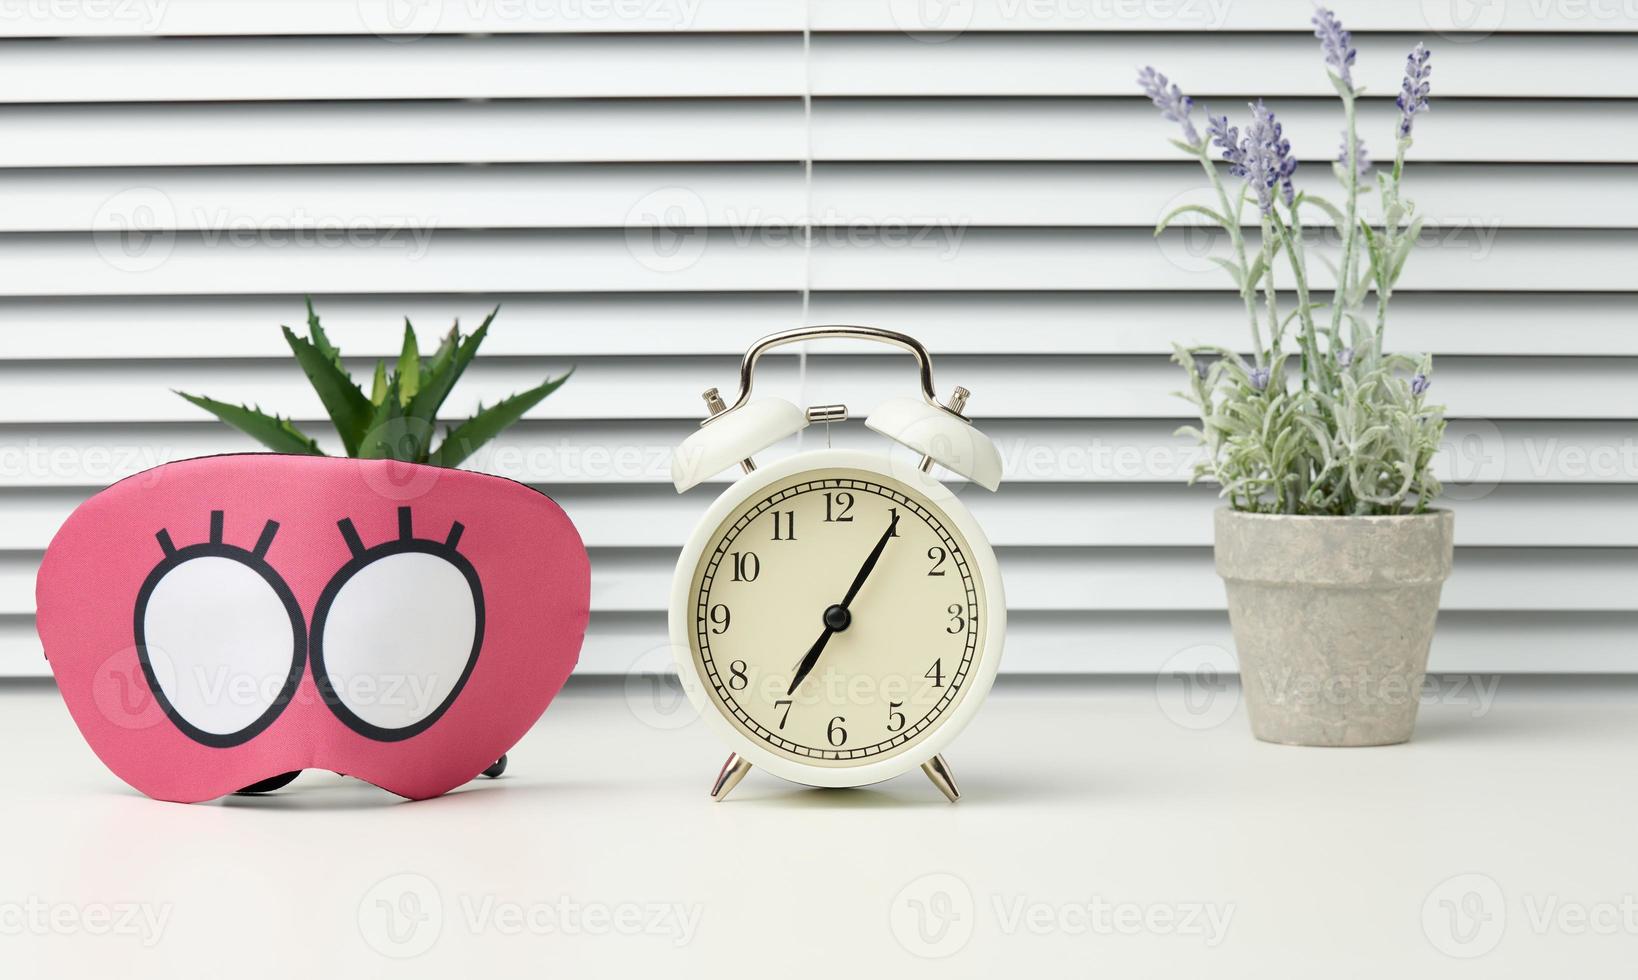 pink textile mask and round white alarm clock on the table, behind the white blinds photo